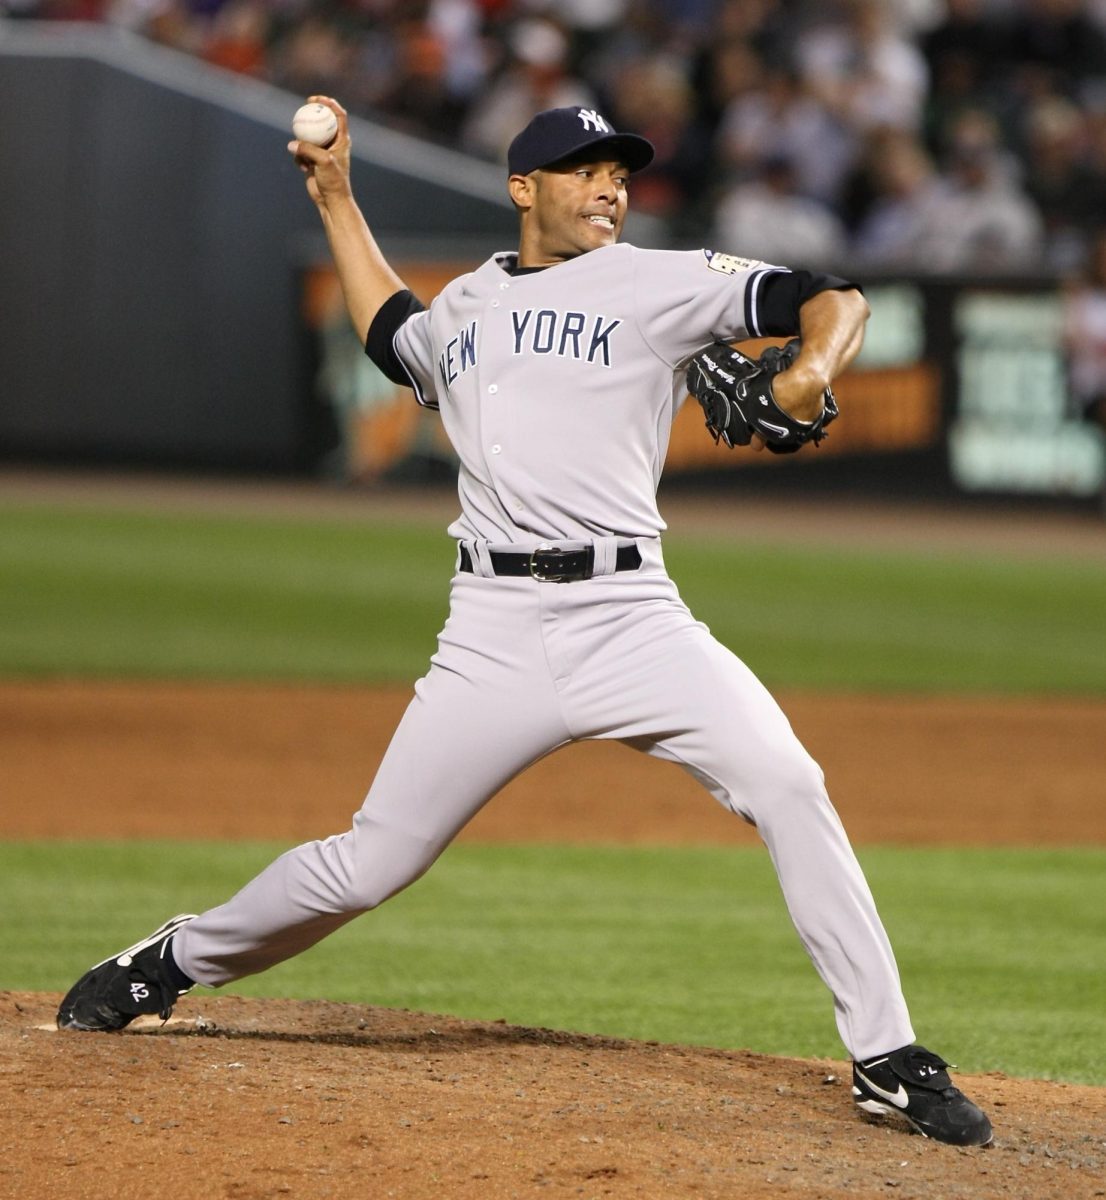 Wikimedia Commons | Since New York Yankees' legend Mariano Rivera retired, the team emphasis on having a dominant closer has diminished. Eilat Herman (CAS '26) calls on that to change.